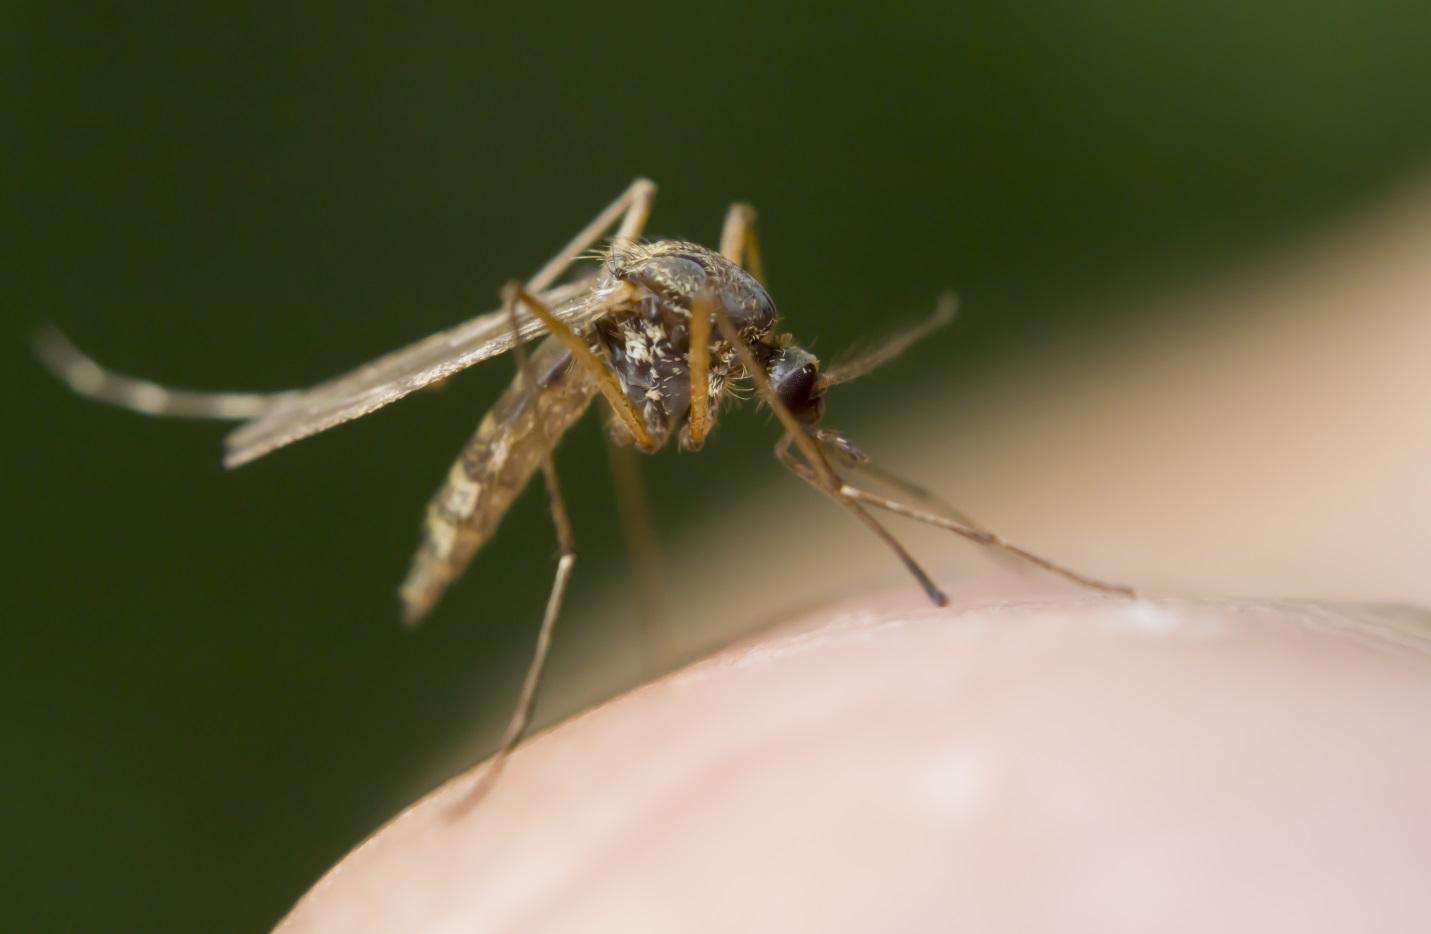 mosquito up close on someone's skin